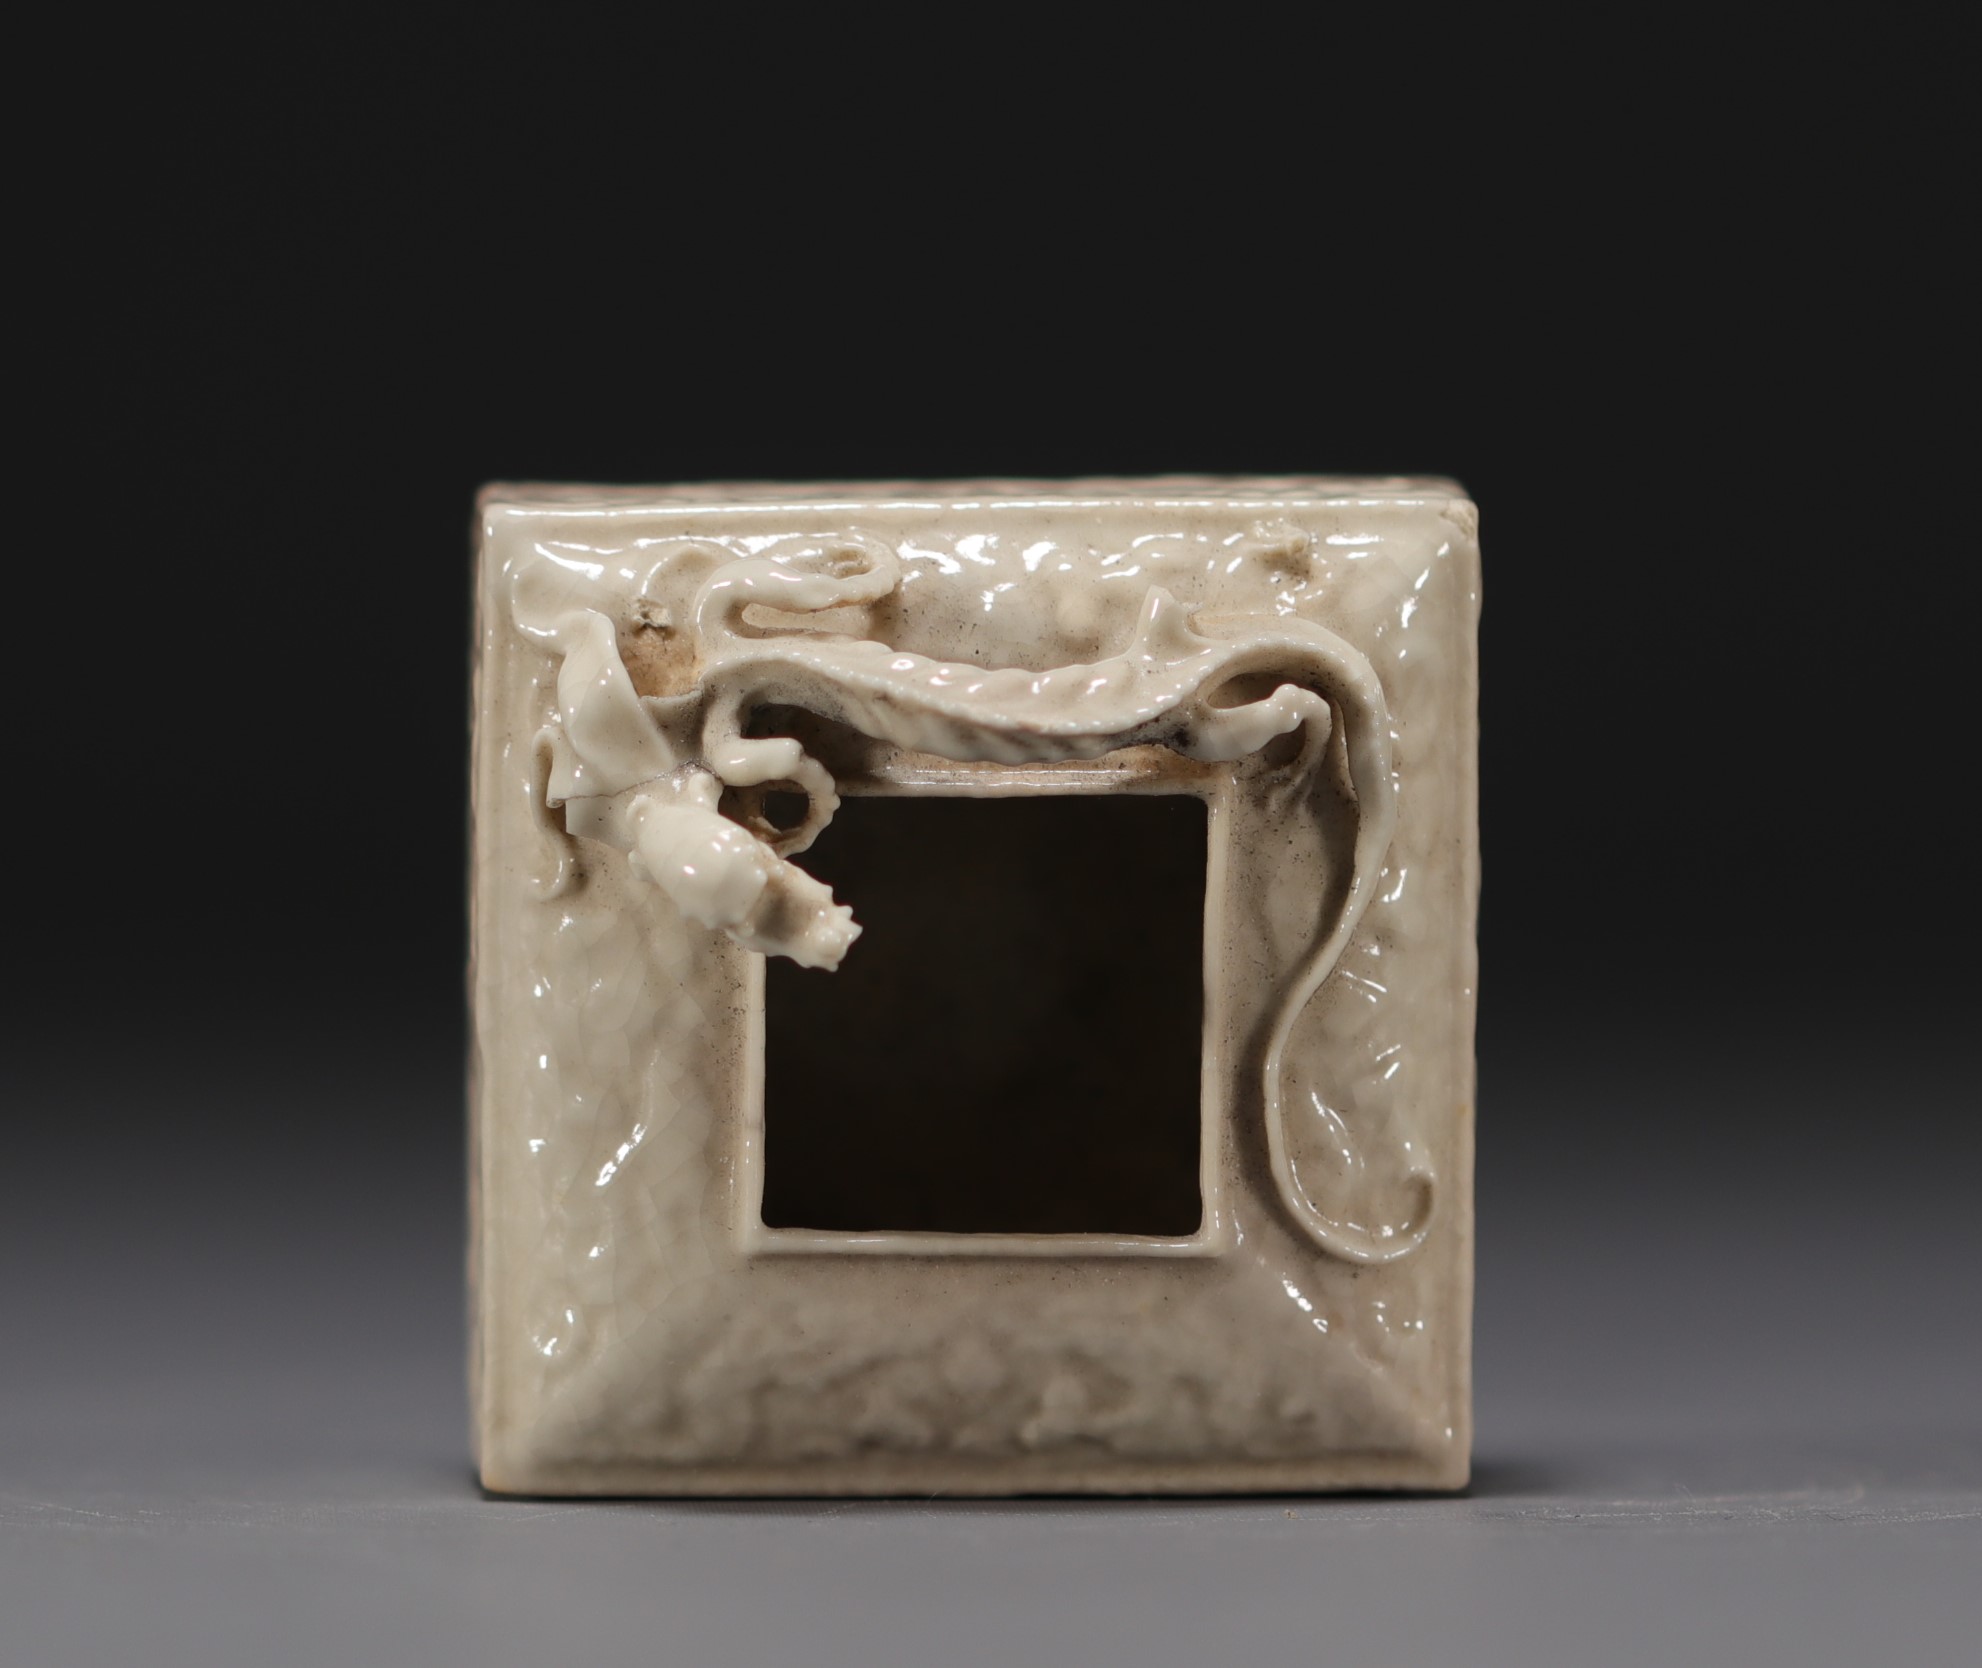 China - "Blanc de Chine" (Dehua porcelain) porcelain inkwell decorated with a dragon.